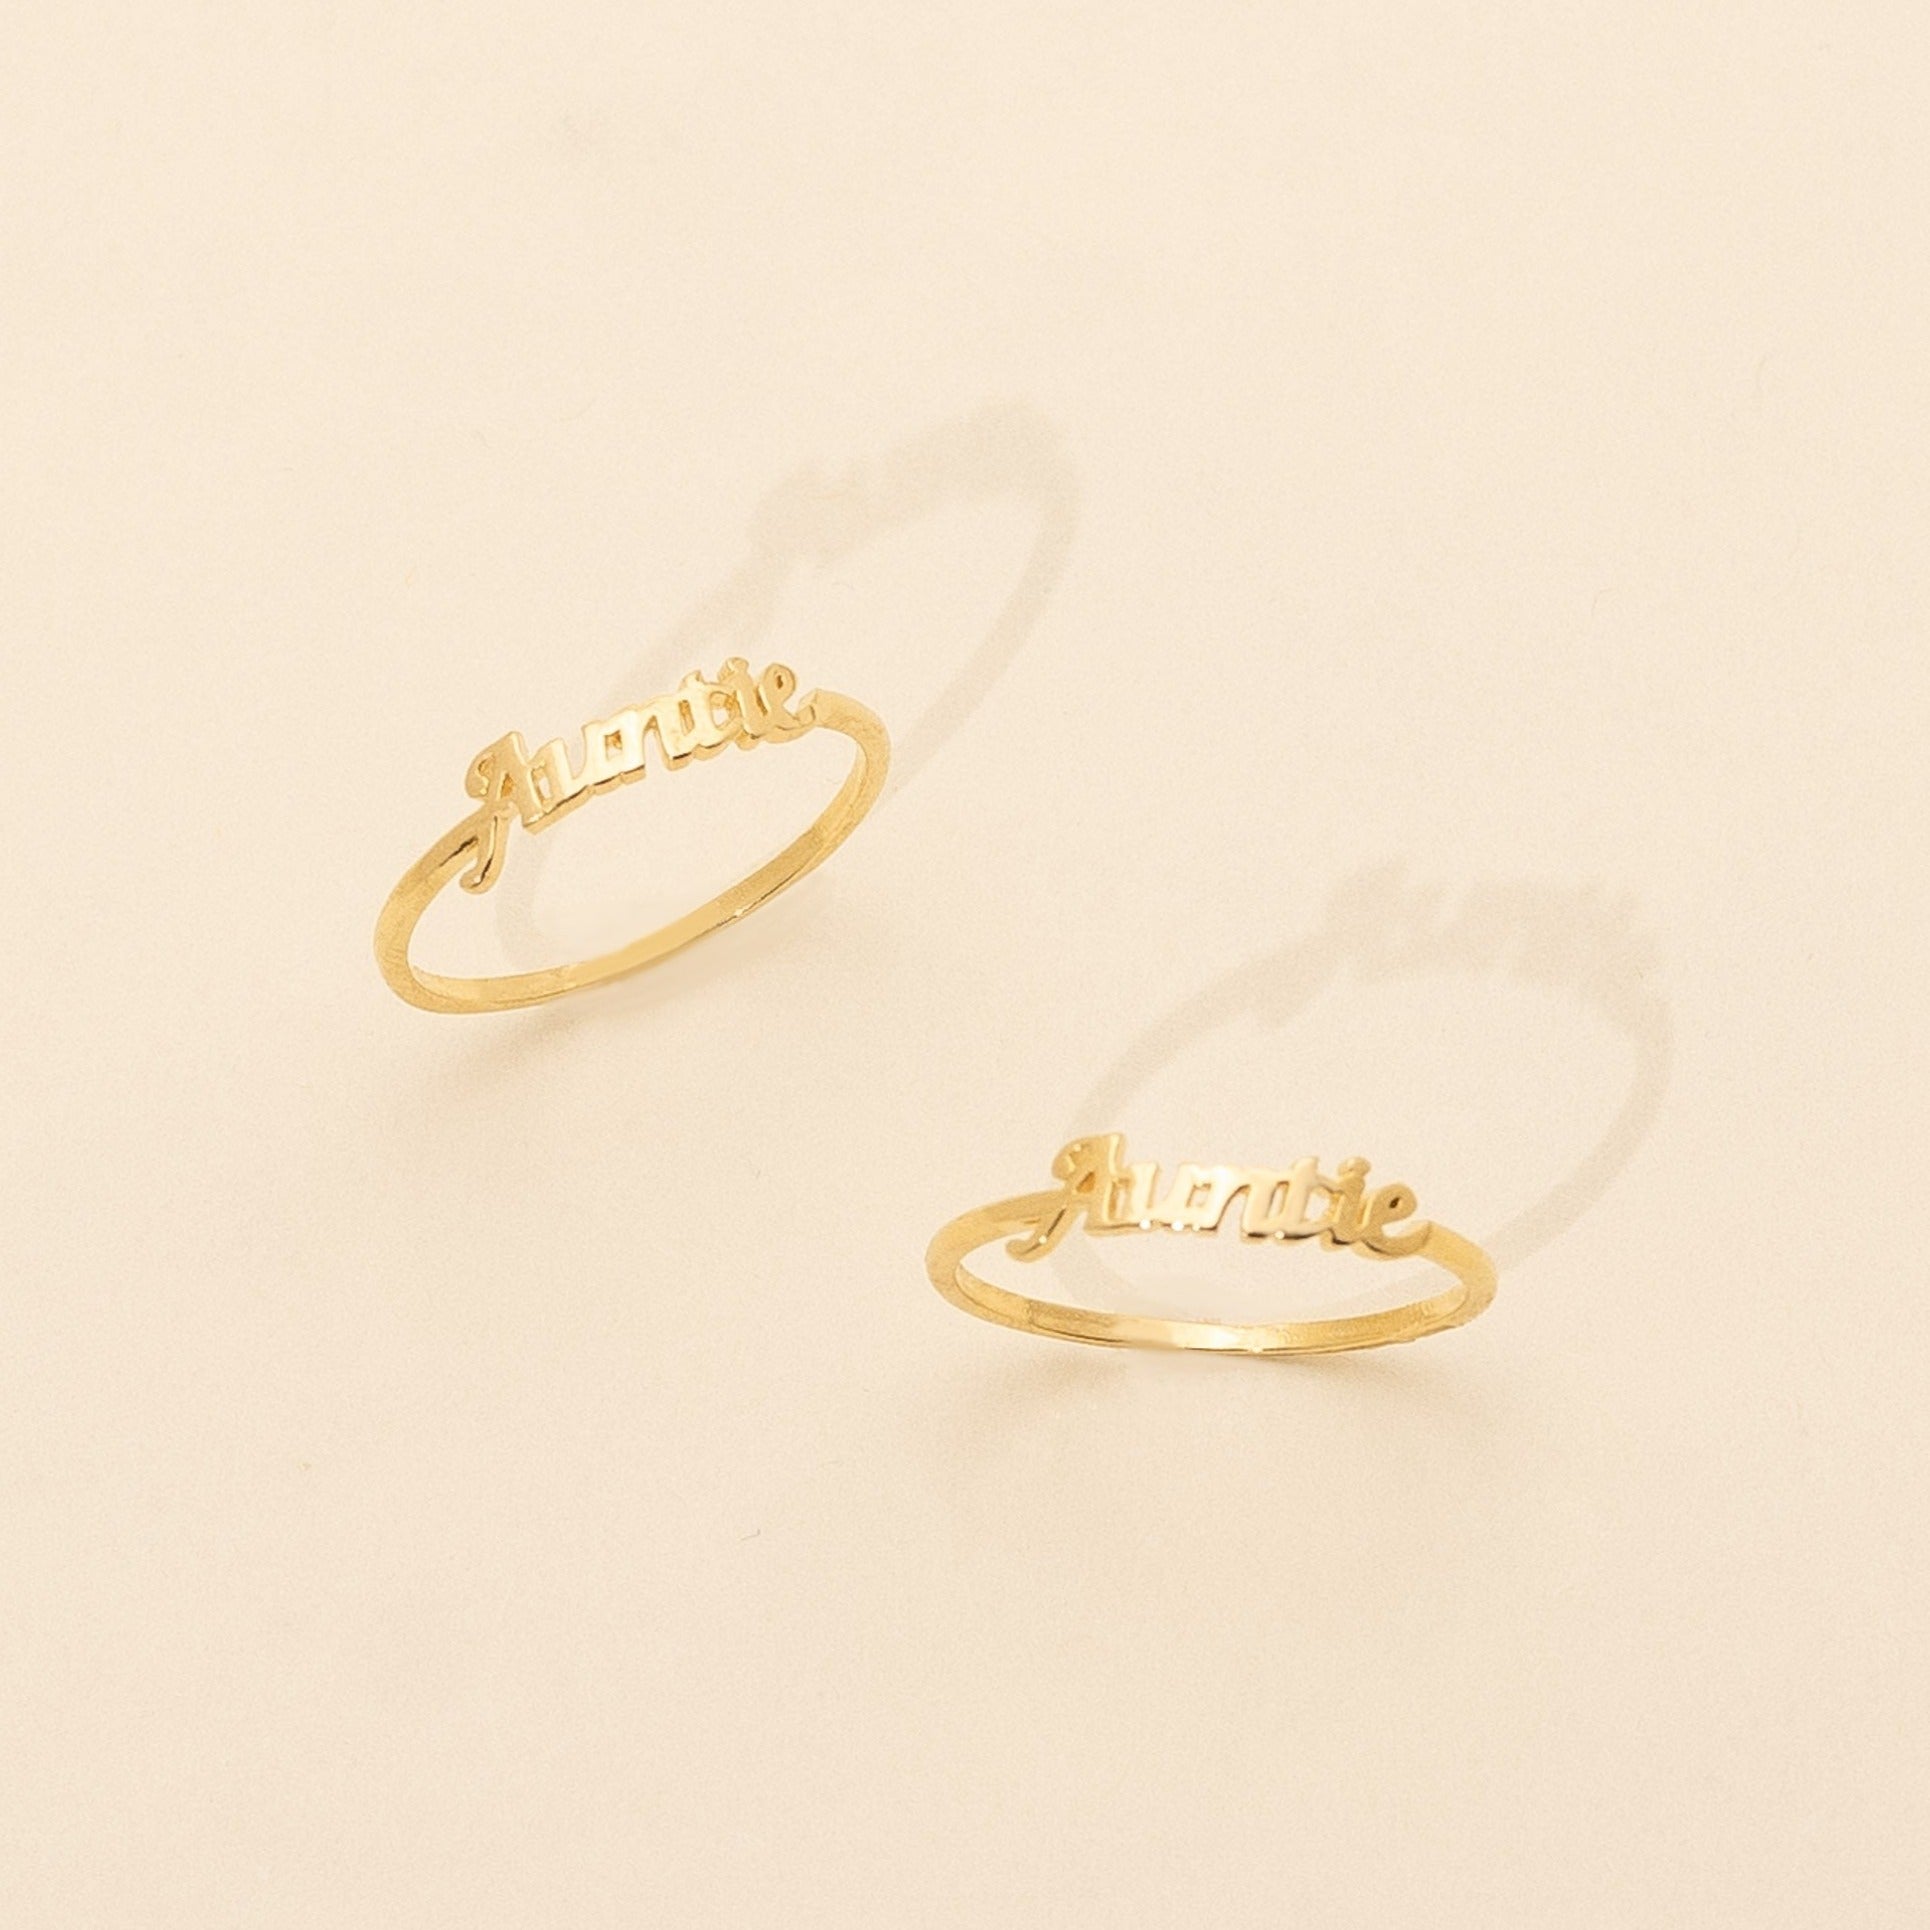 Dainty, delicate gold Auntie stacking ring, made in America by Katie Dean Jewelry